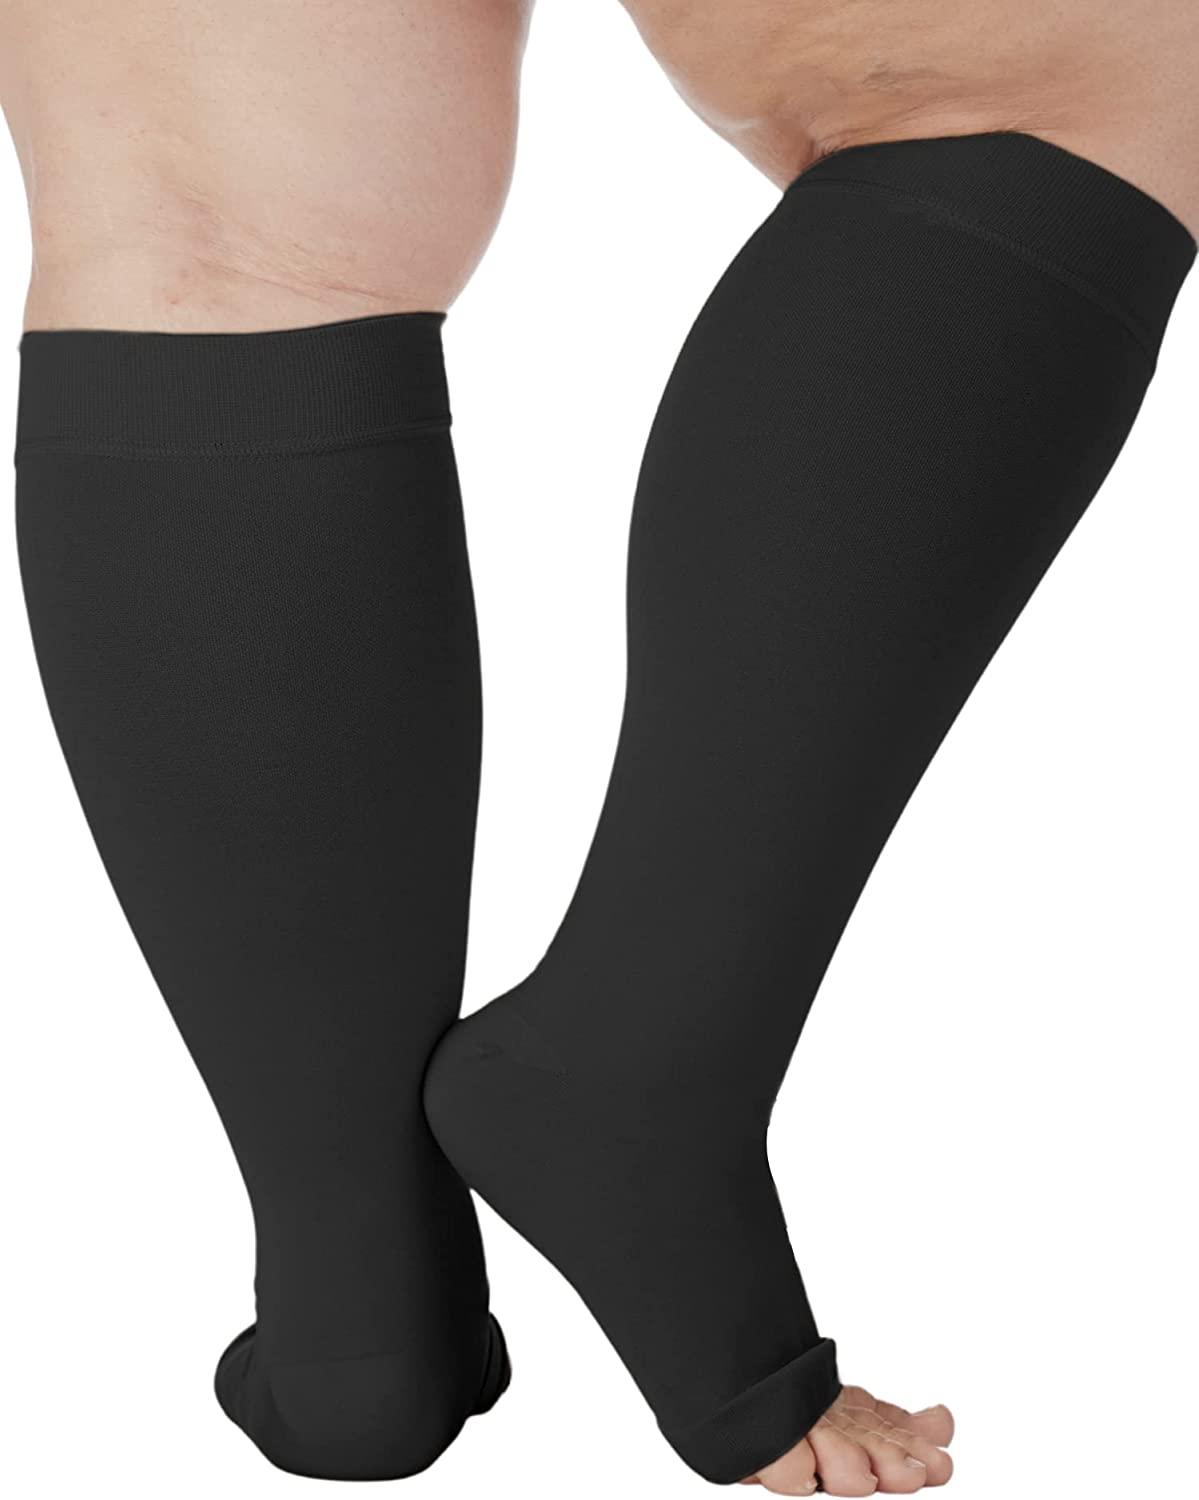  ABSOLUTE SUPPORT Compression Stockings For Women Varicose  Veins 20-30mmHg - Compression Leggings